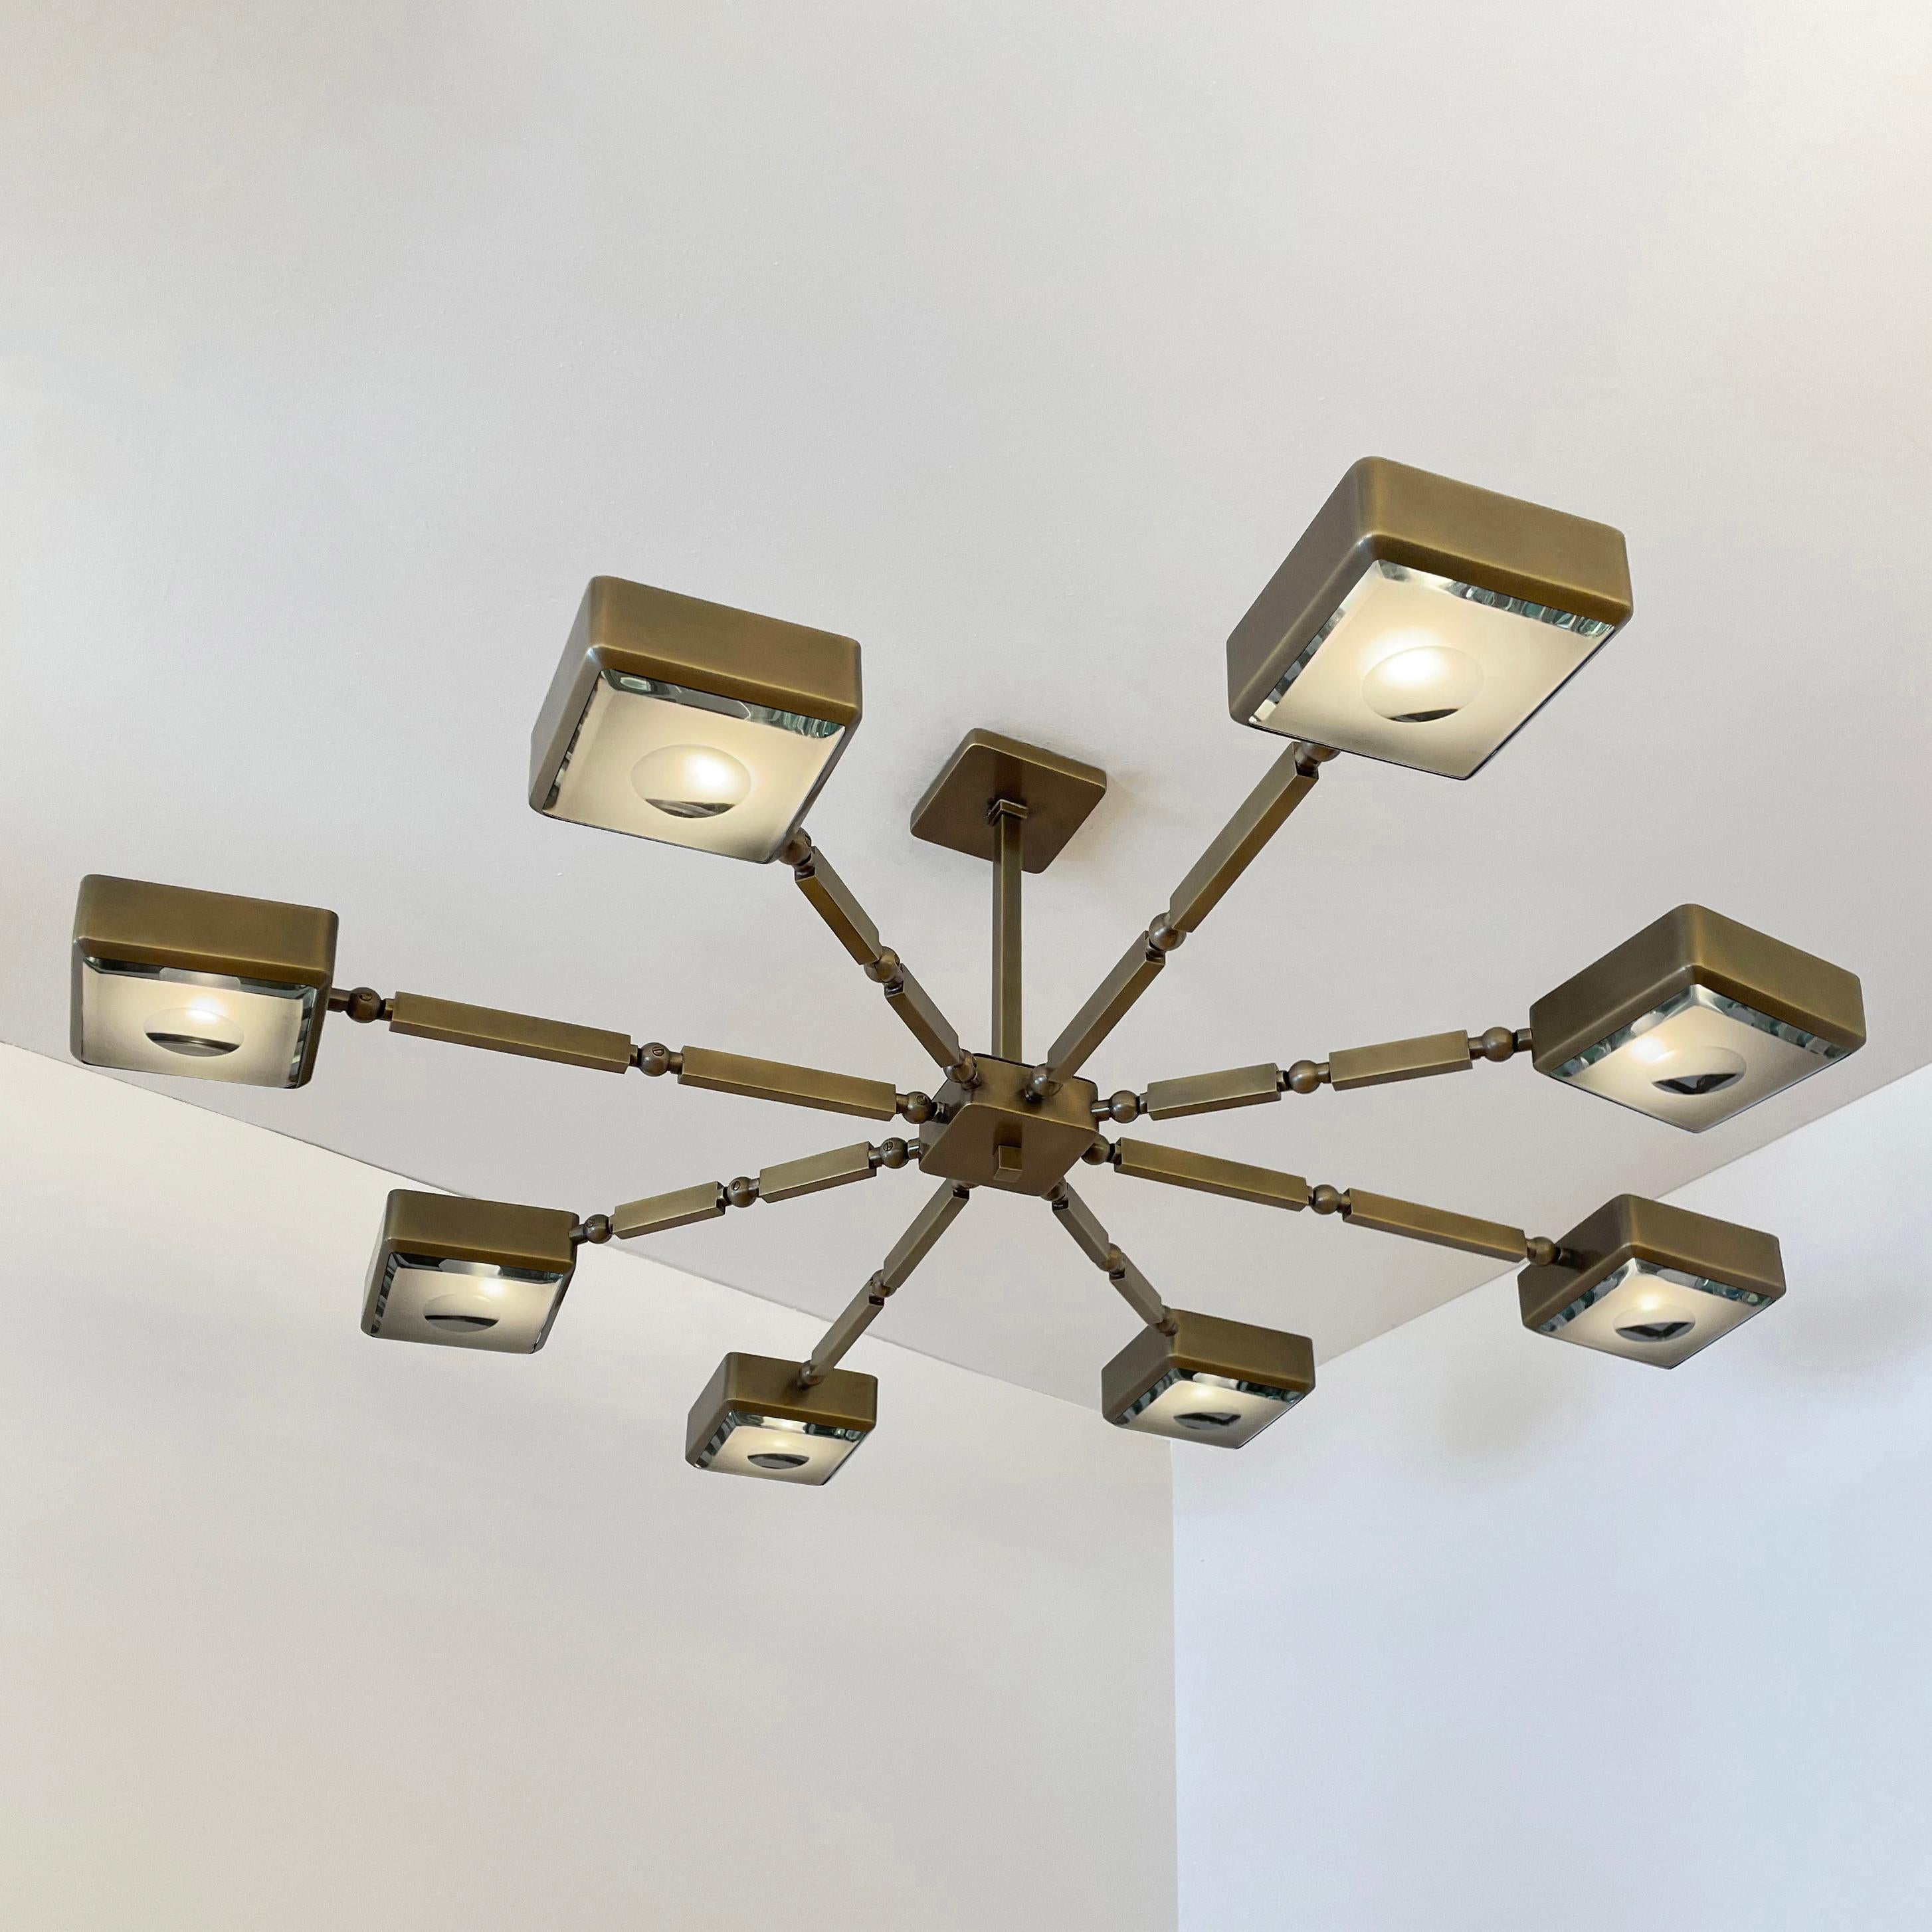 The Otto ceiling light features an innovative articulating design that allows the arms to have a wide range of motion for endless configurations. The brass constructed frame can be flush mounted or installed on a stem and is fitted with our carved